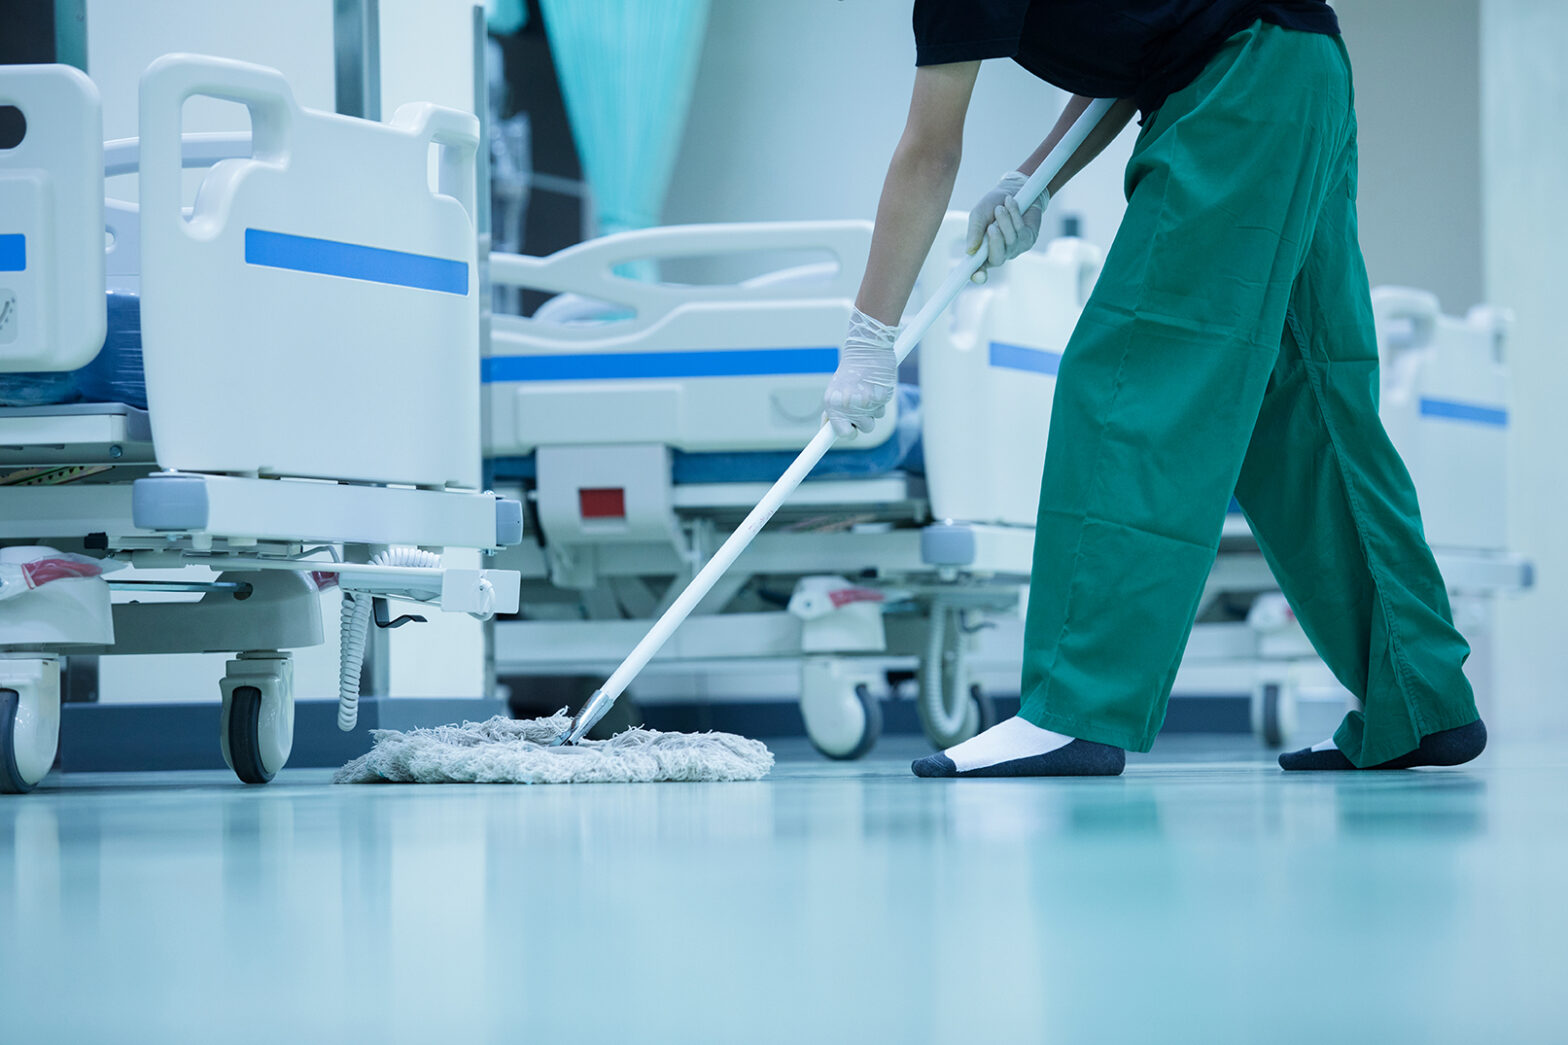 hospital disinfectant products & services market